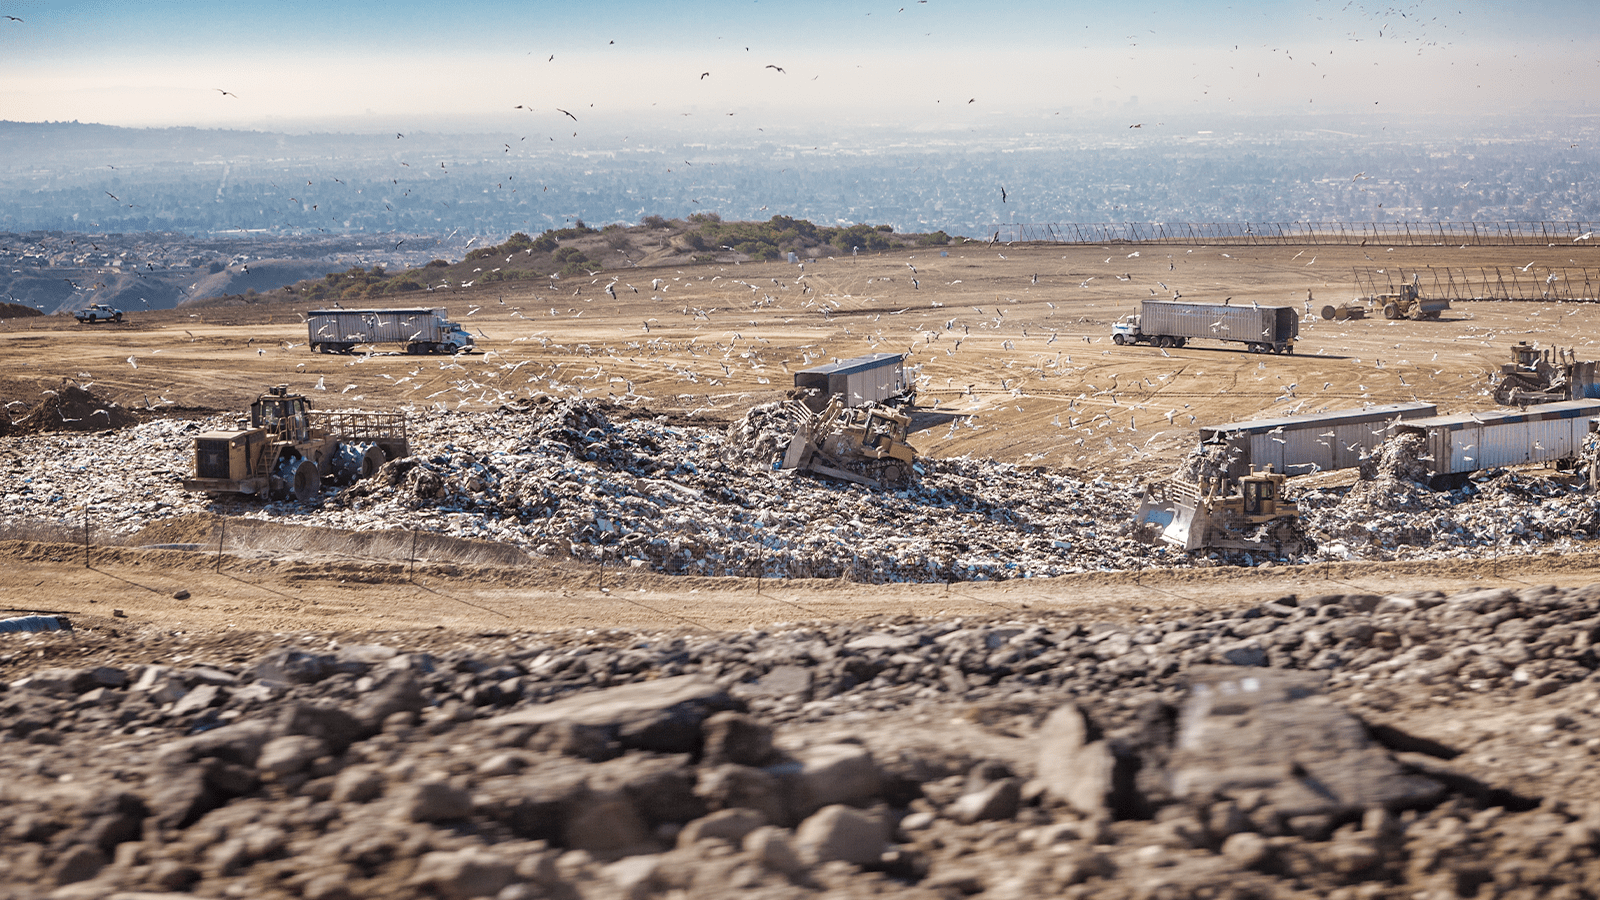 A landscape view of bulldozers and trucks working at a landfill while seagulls fly overhead